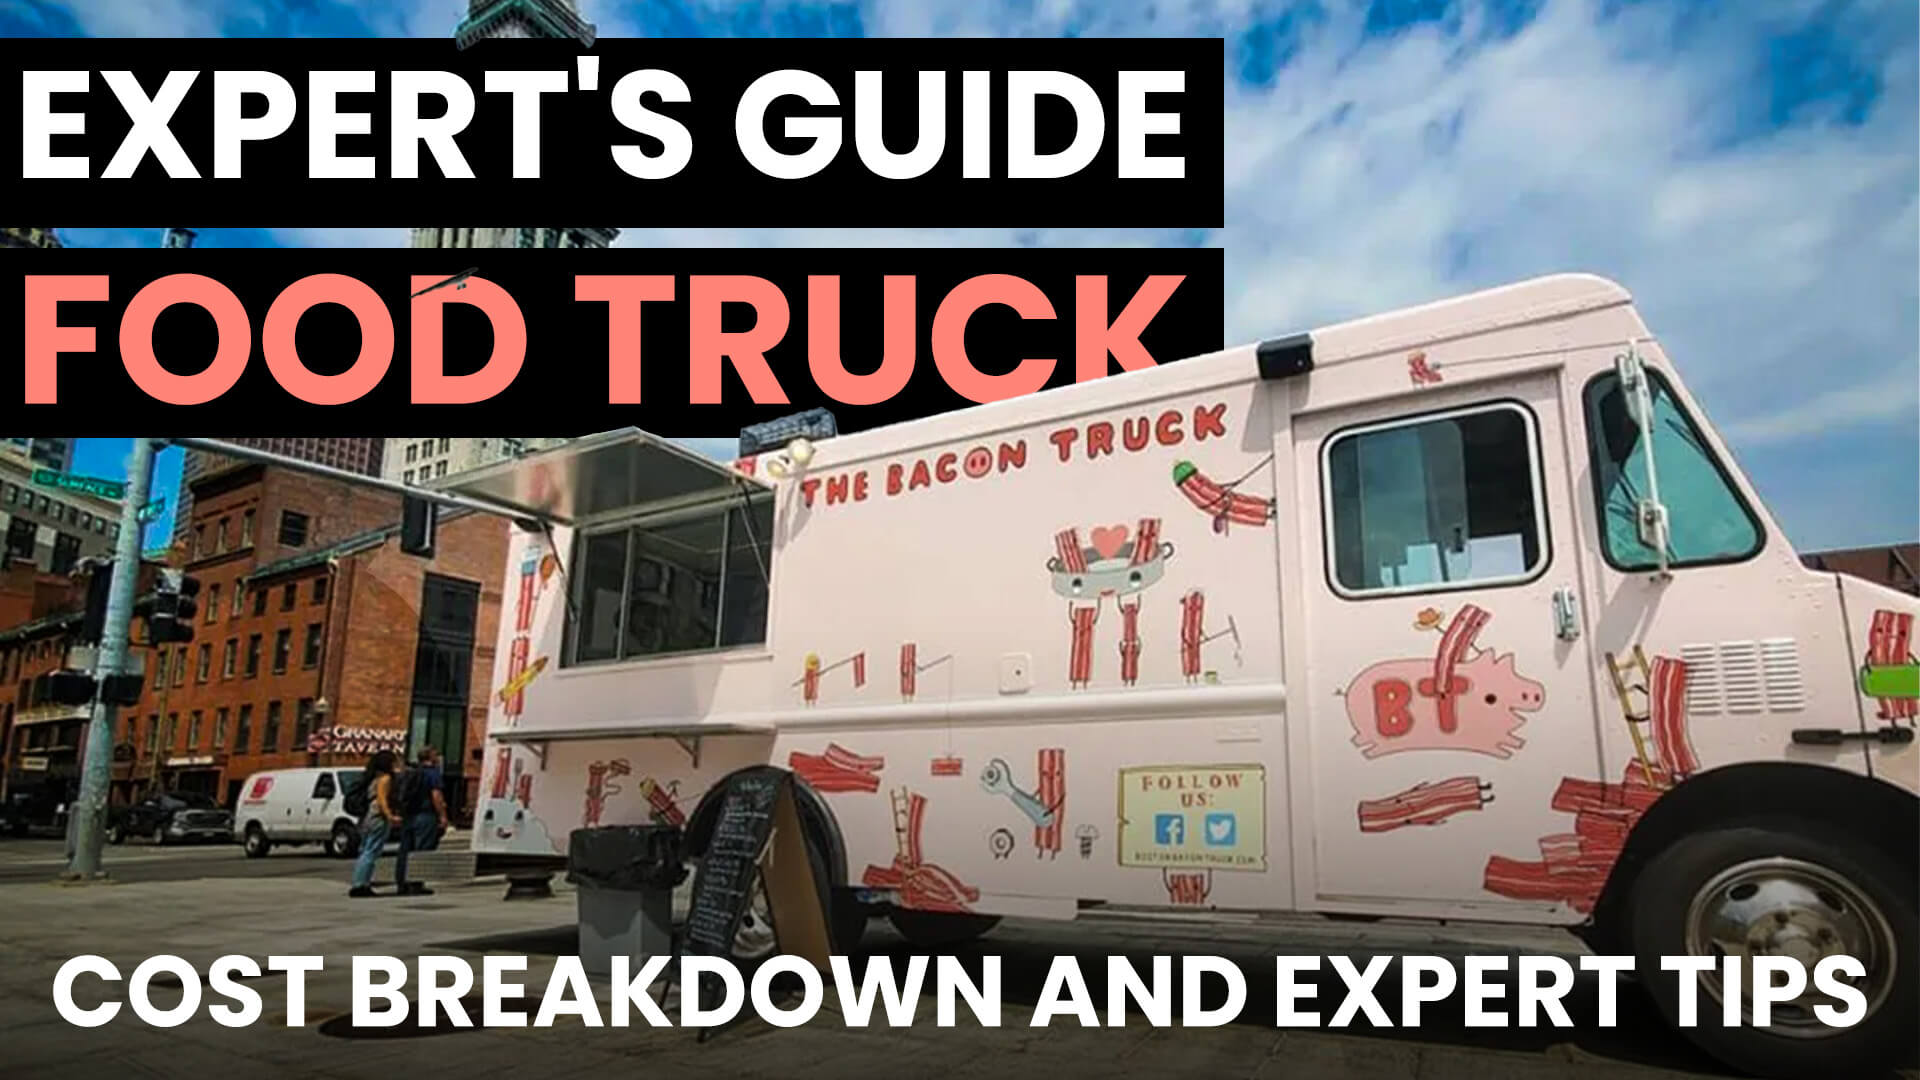 The Expert_s Guide to Starting a Food Truck